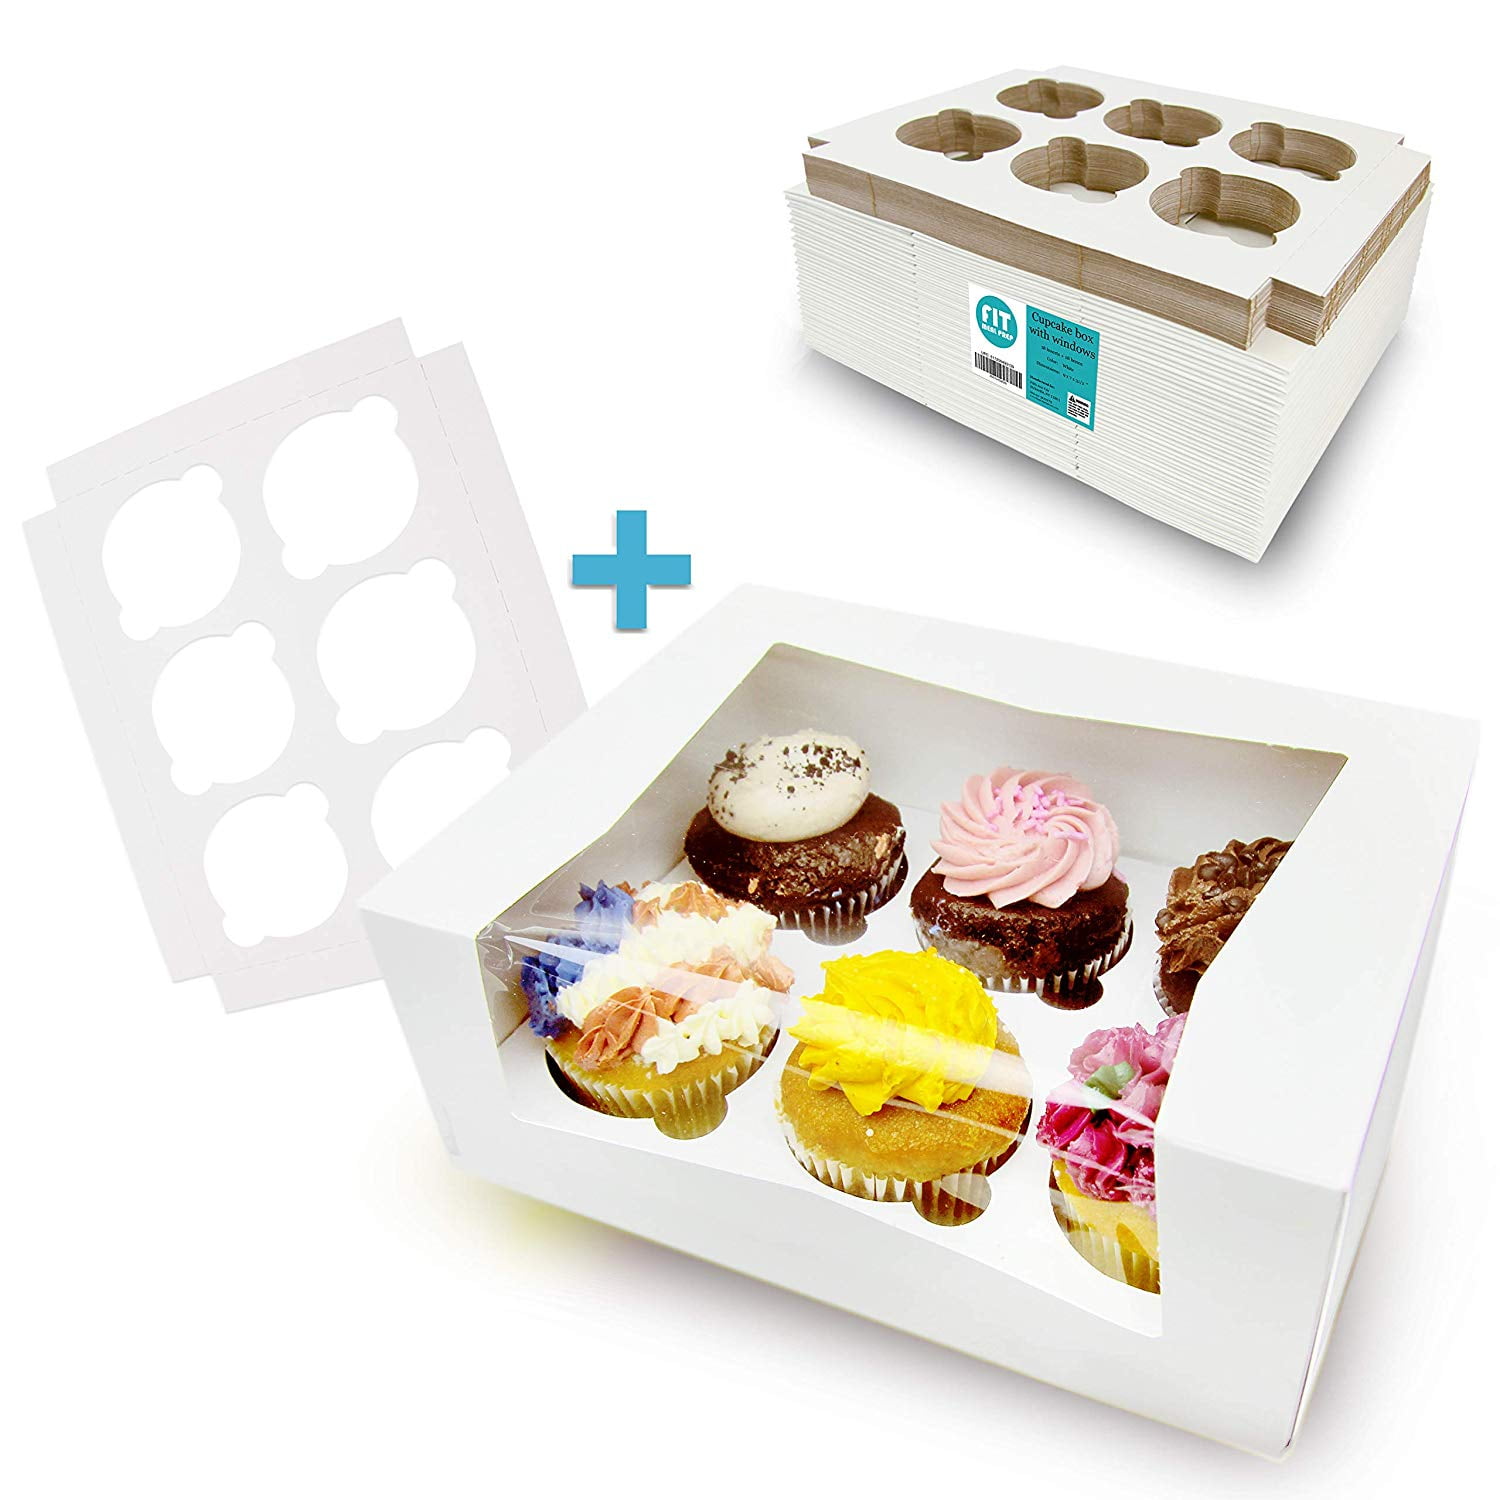 Details about   Bright White Disposable 10x10 Bakery Boxes with Window for Cake Pie & Pastry 